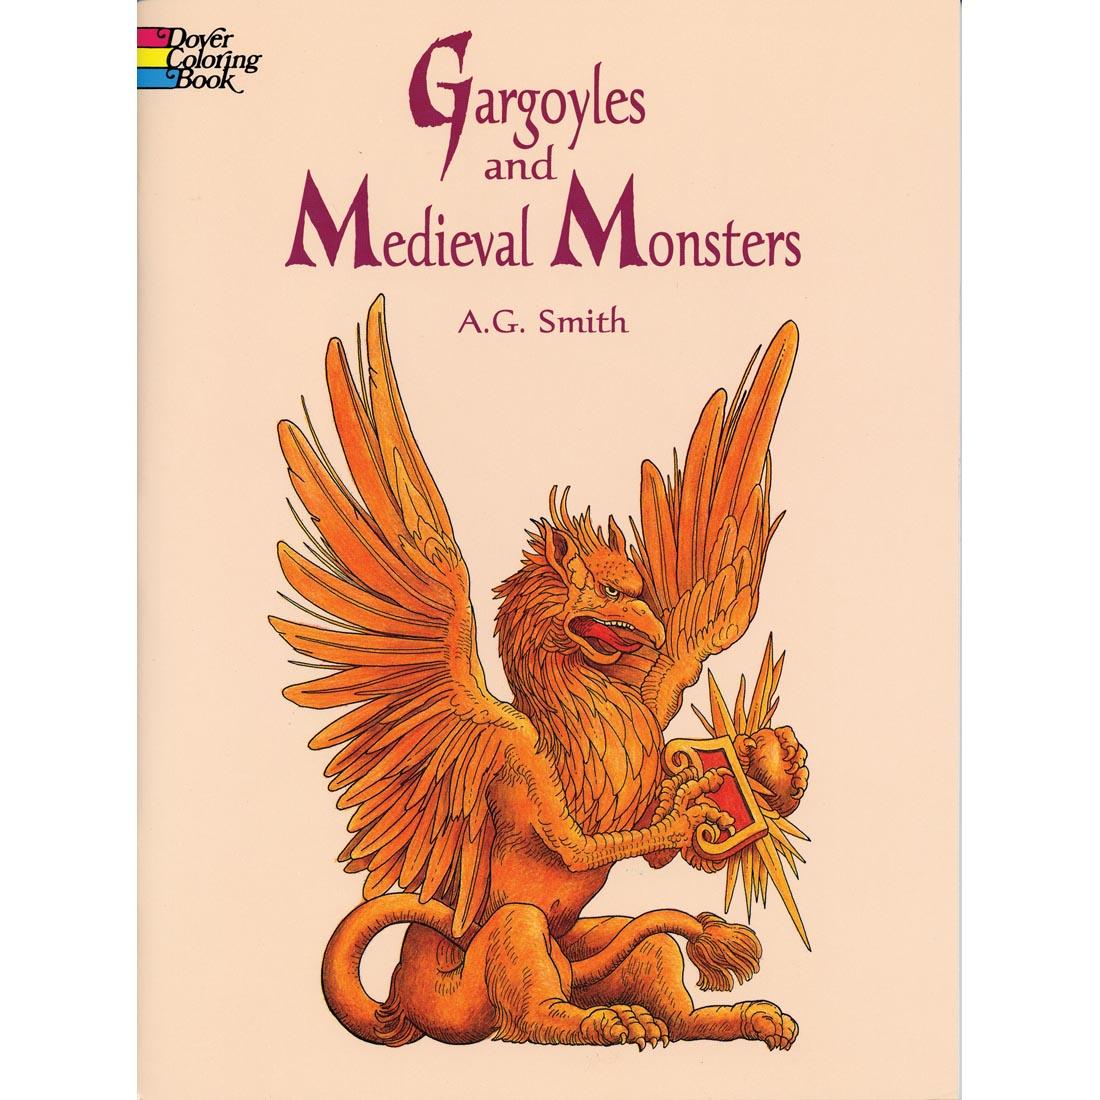 Gargoyles and Medieval Monsters Coloring Book by Dover